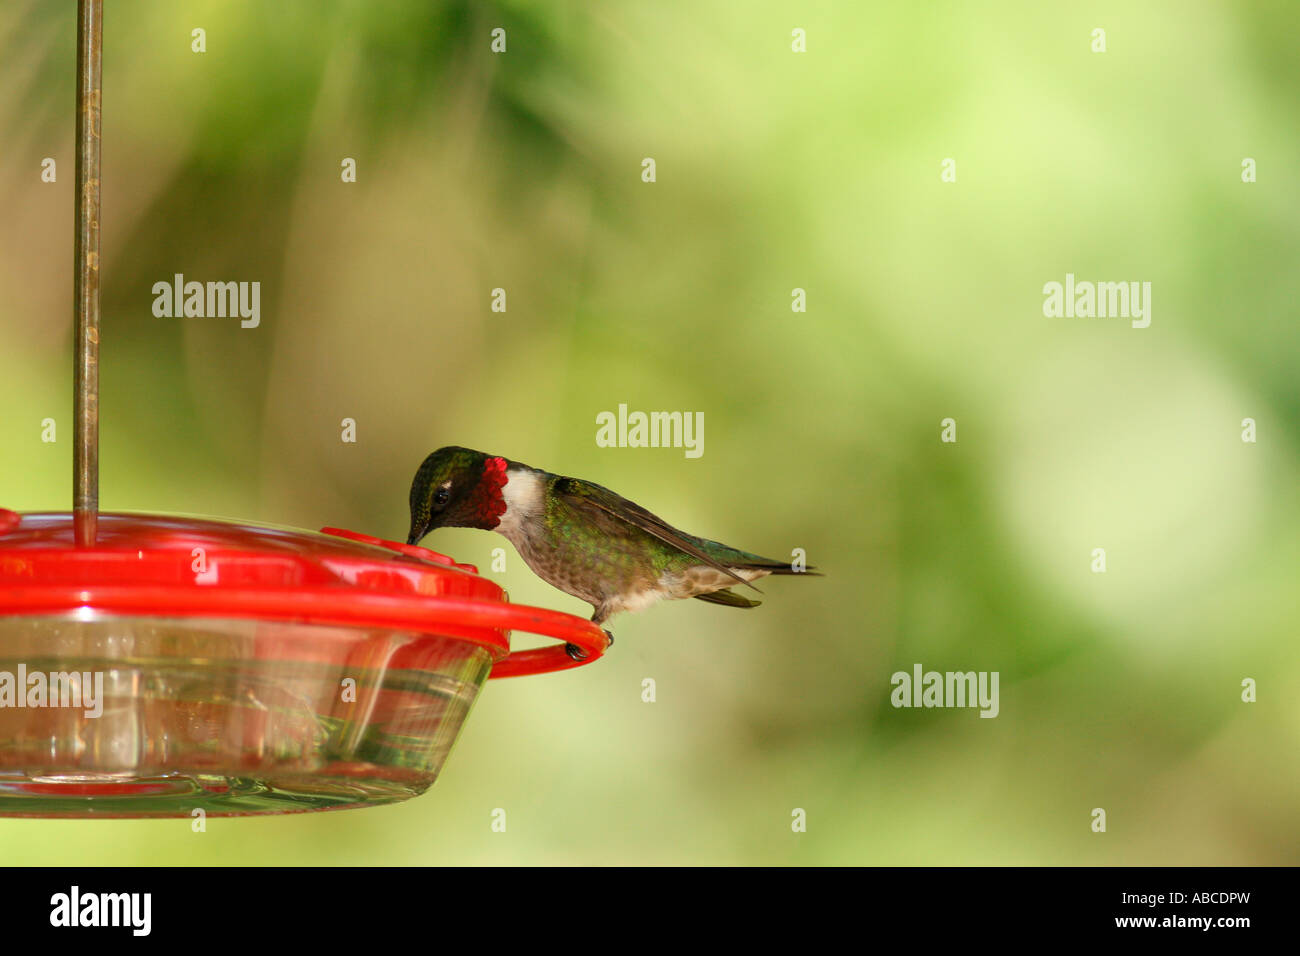 Ruby-throated Hummingbird at syrup feeder Stock Photo